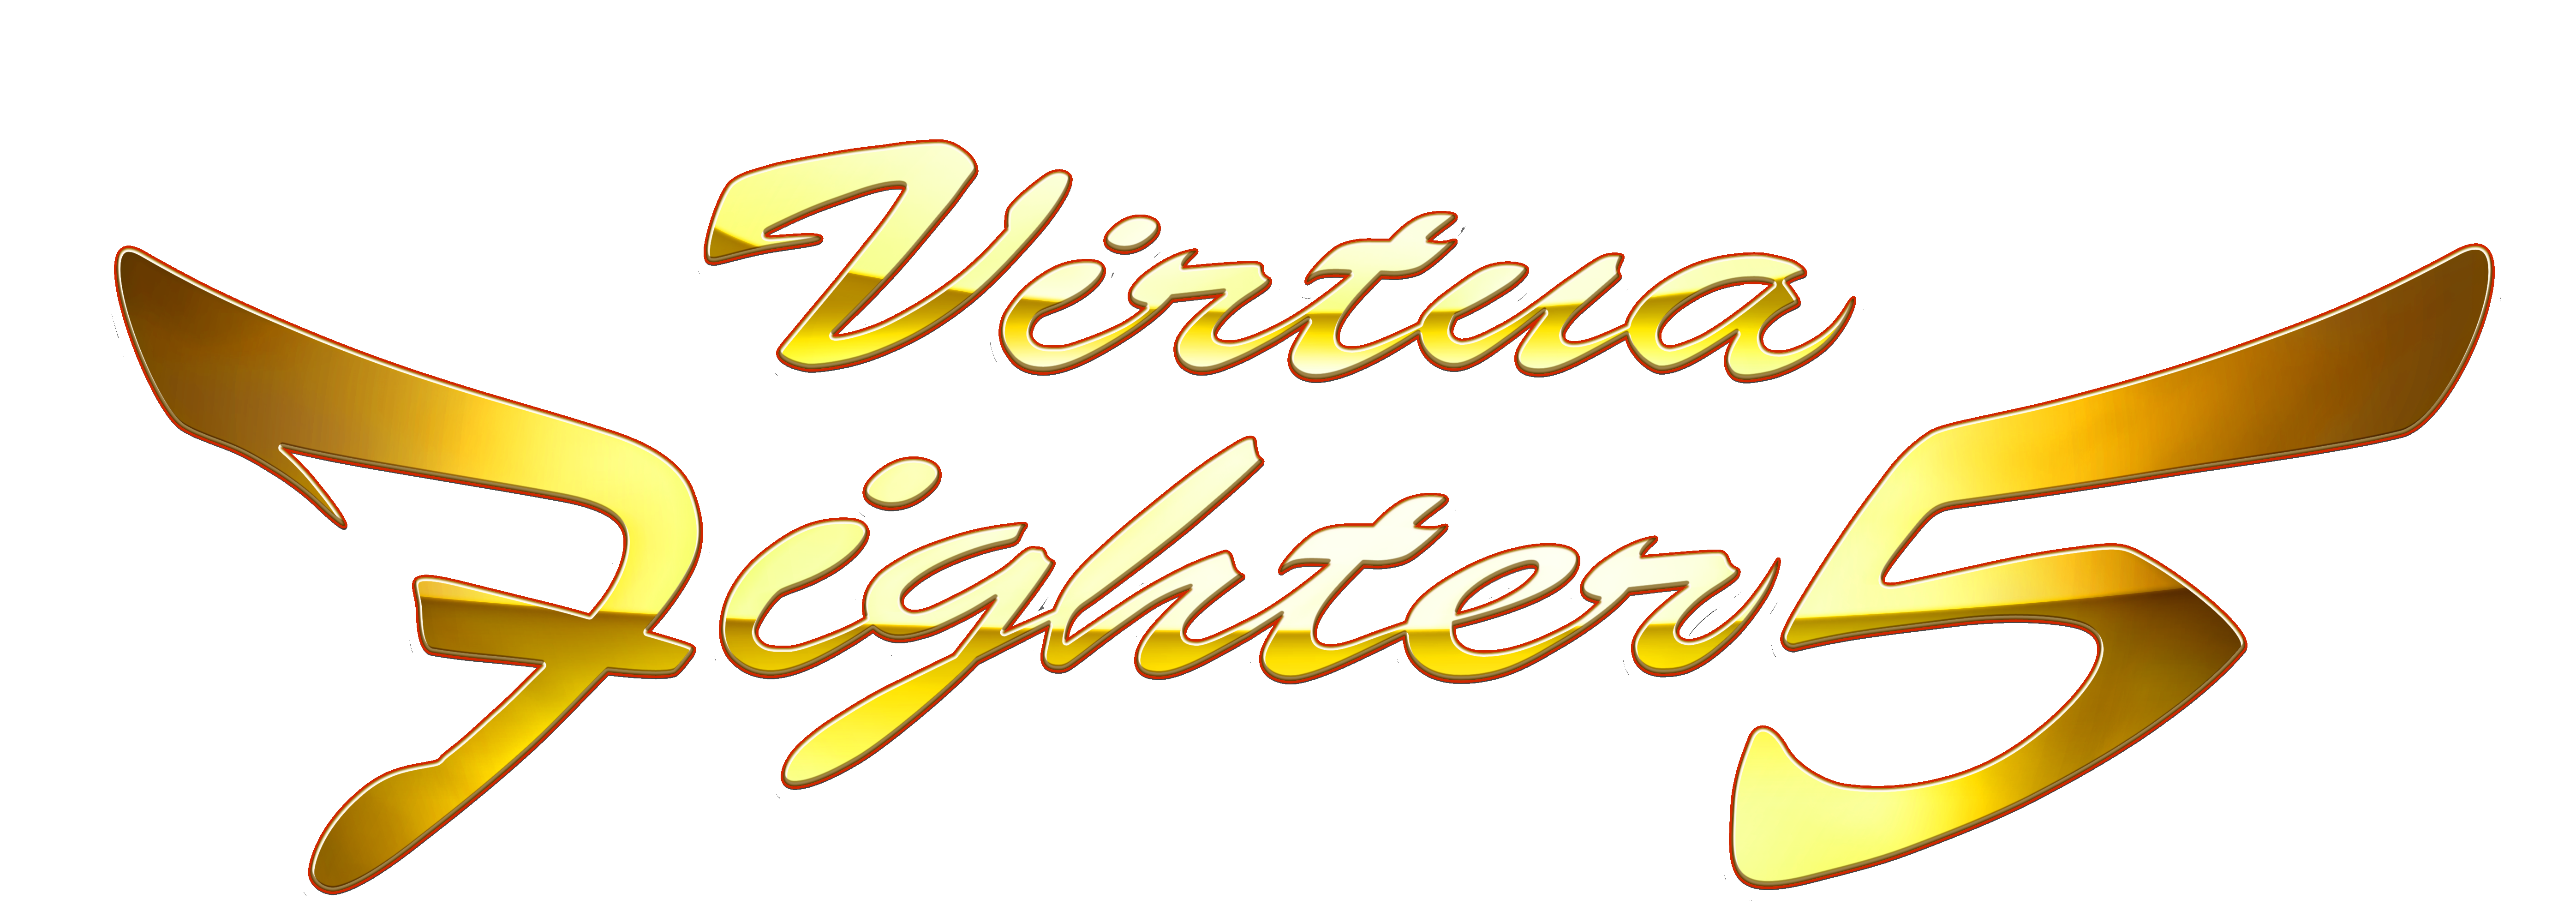 Video Game Virtua Fighter 5 HD Wallpaper | Background Image